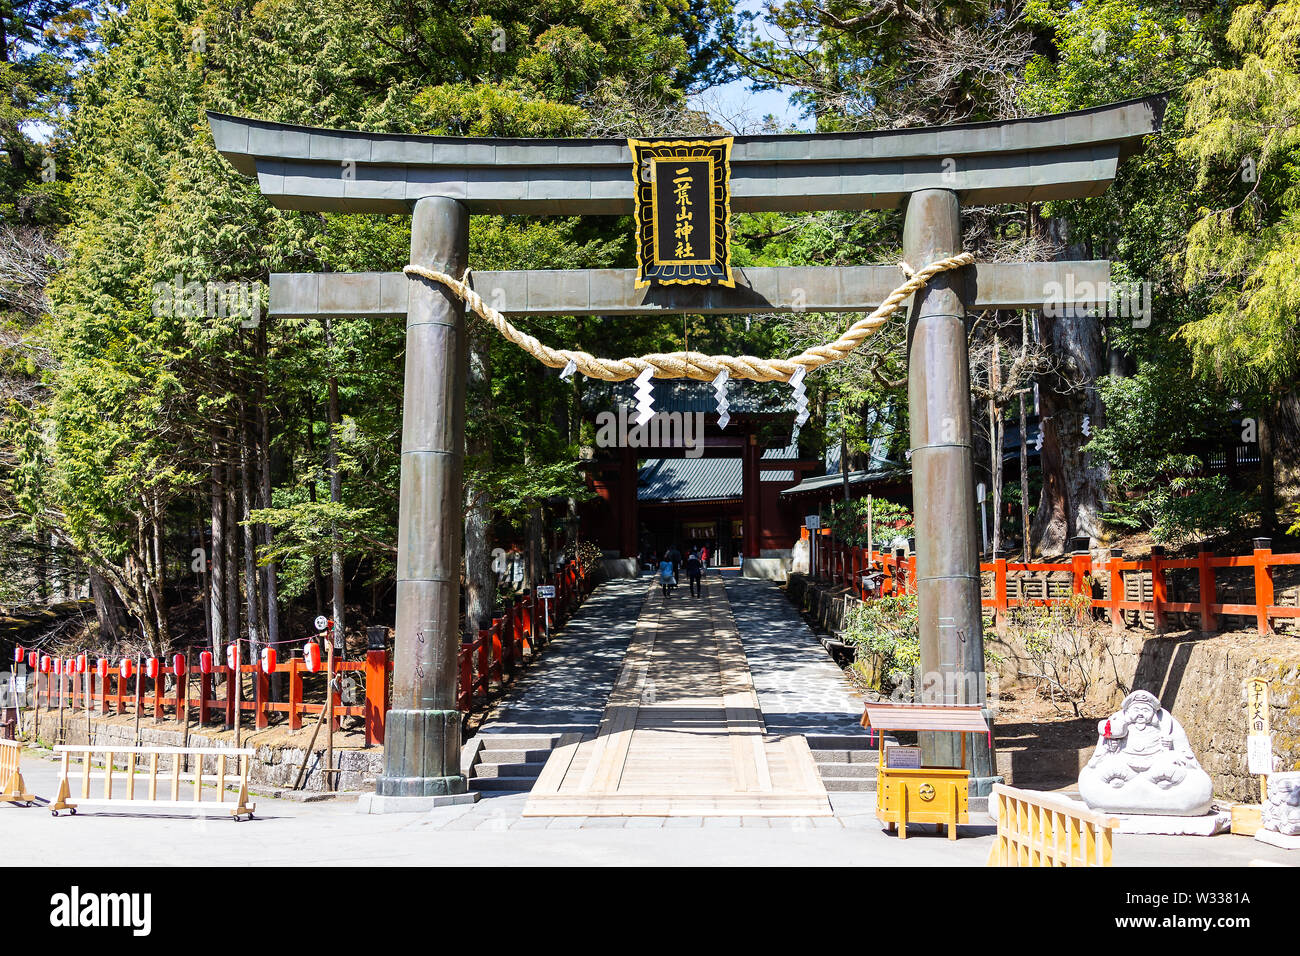 Nikko, Japan - April 4, 2019: People walking by entrance to Futarasan temple shrine with torii gate, rope and paper in Tochigi prefecture in spring Stock Photo